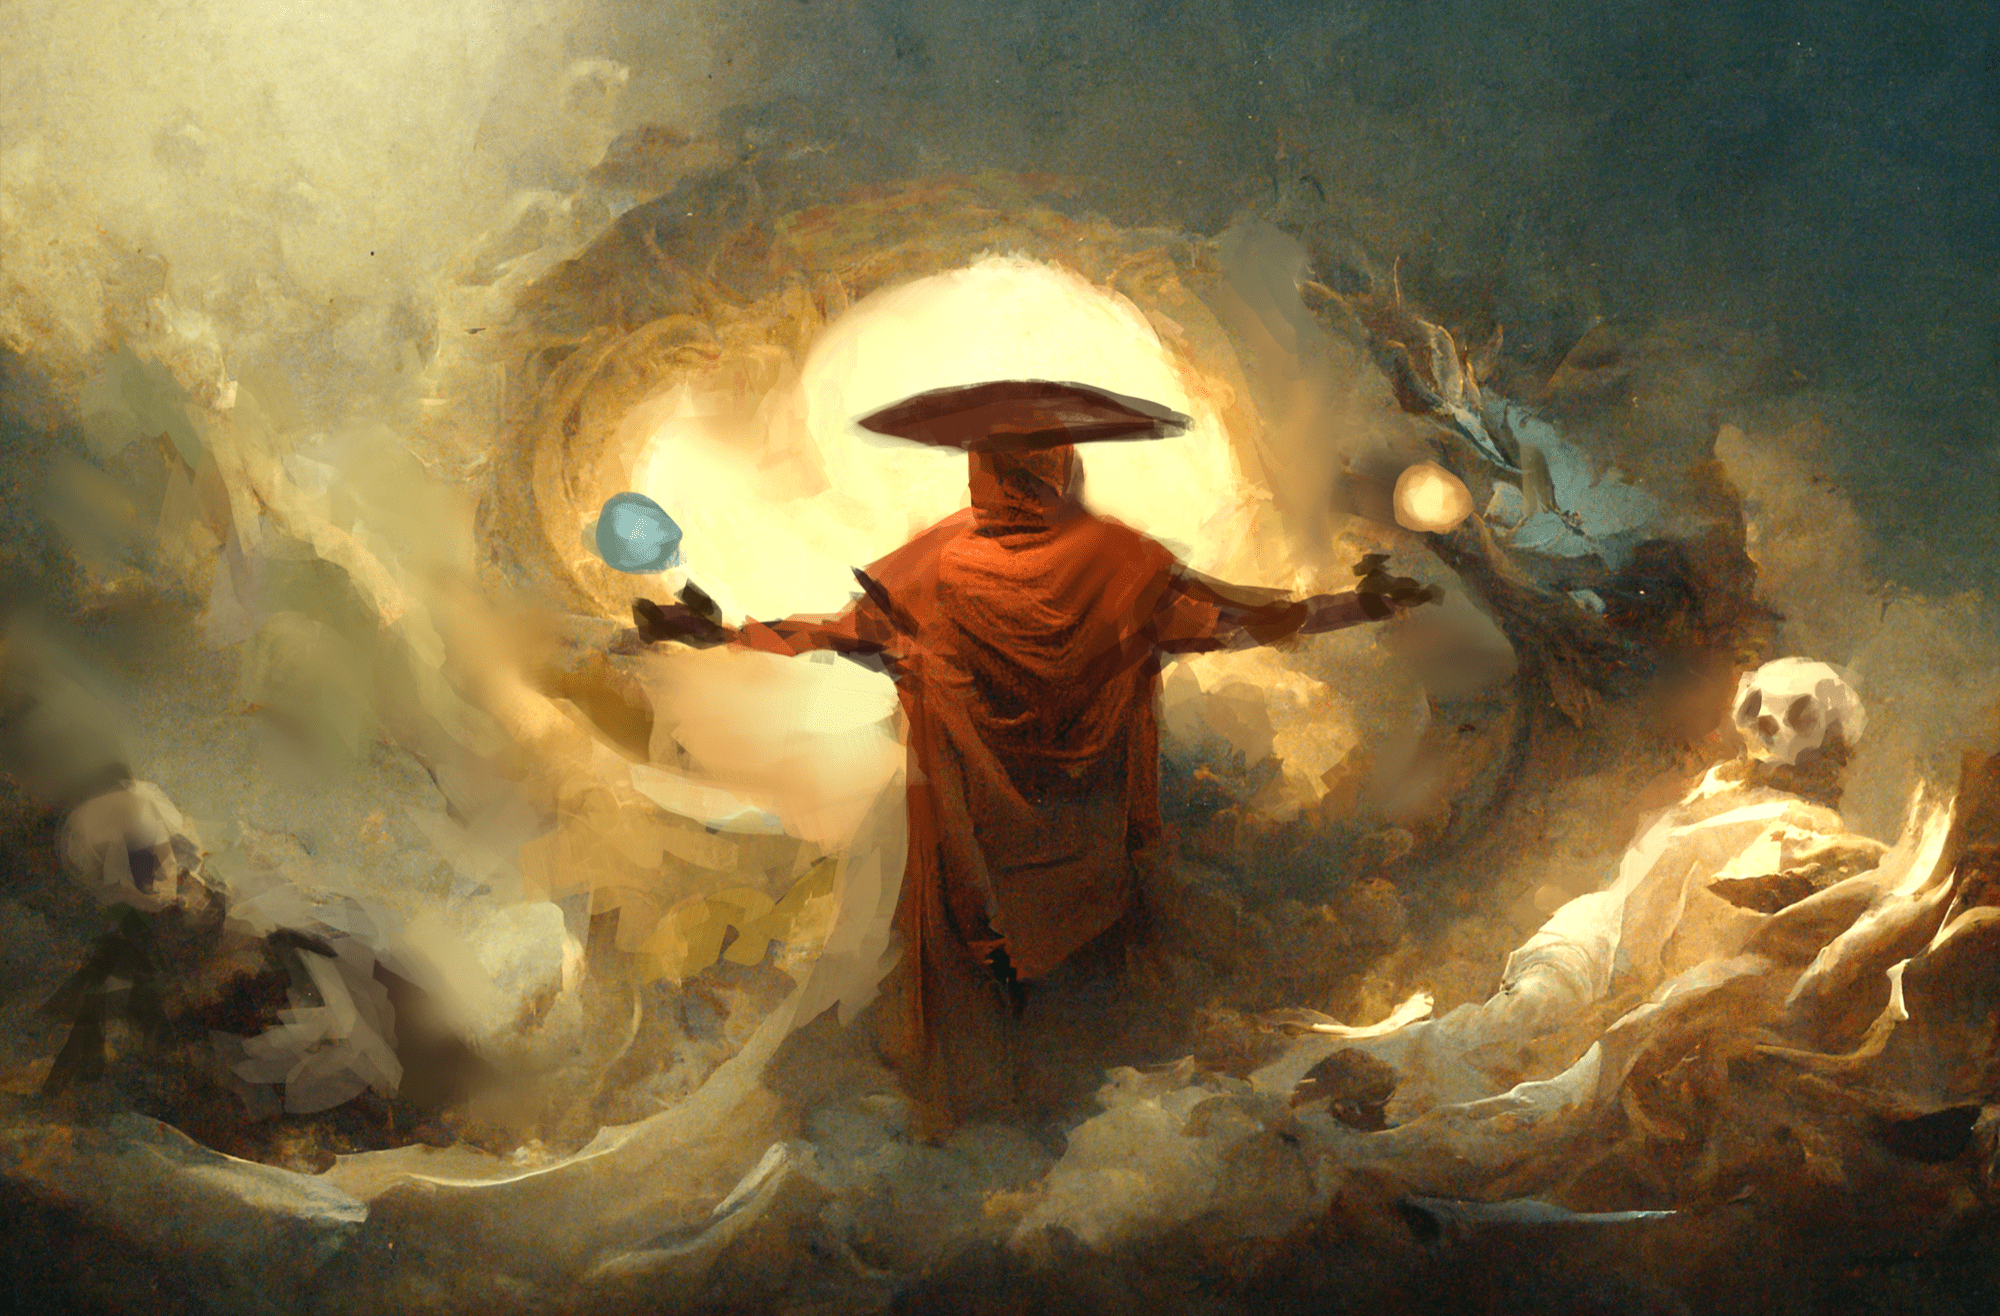 an oil painted illustration of a lone figure, with its back to the viewer, wearing a red cloak and a wide cleric-style hat, also in red. surrounding it is a swirling cloudy vortex. the figure has its arms outstretched and hovering above each hand is a swirling orb, one blue, one yellow. To the left and right of the figure are two decaying skeletons